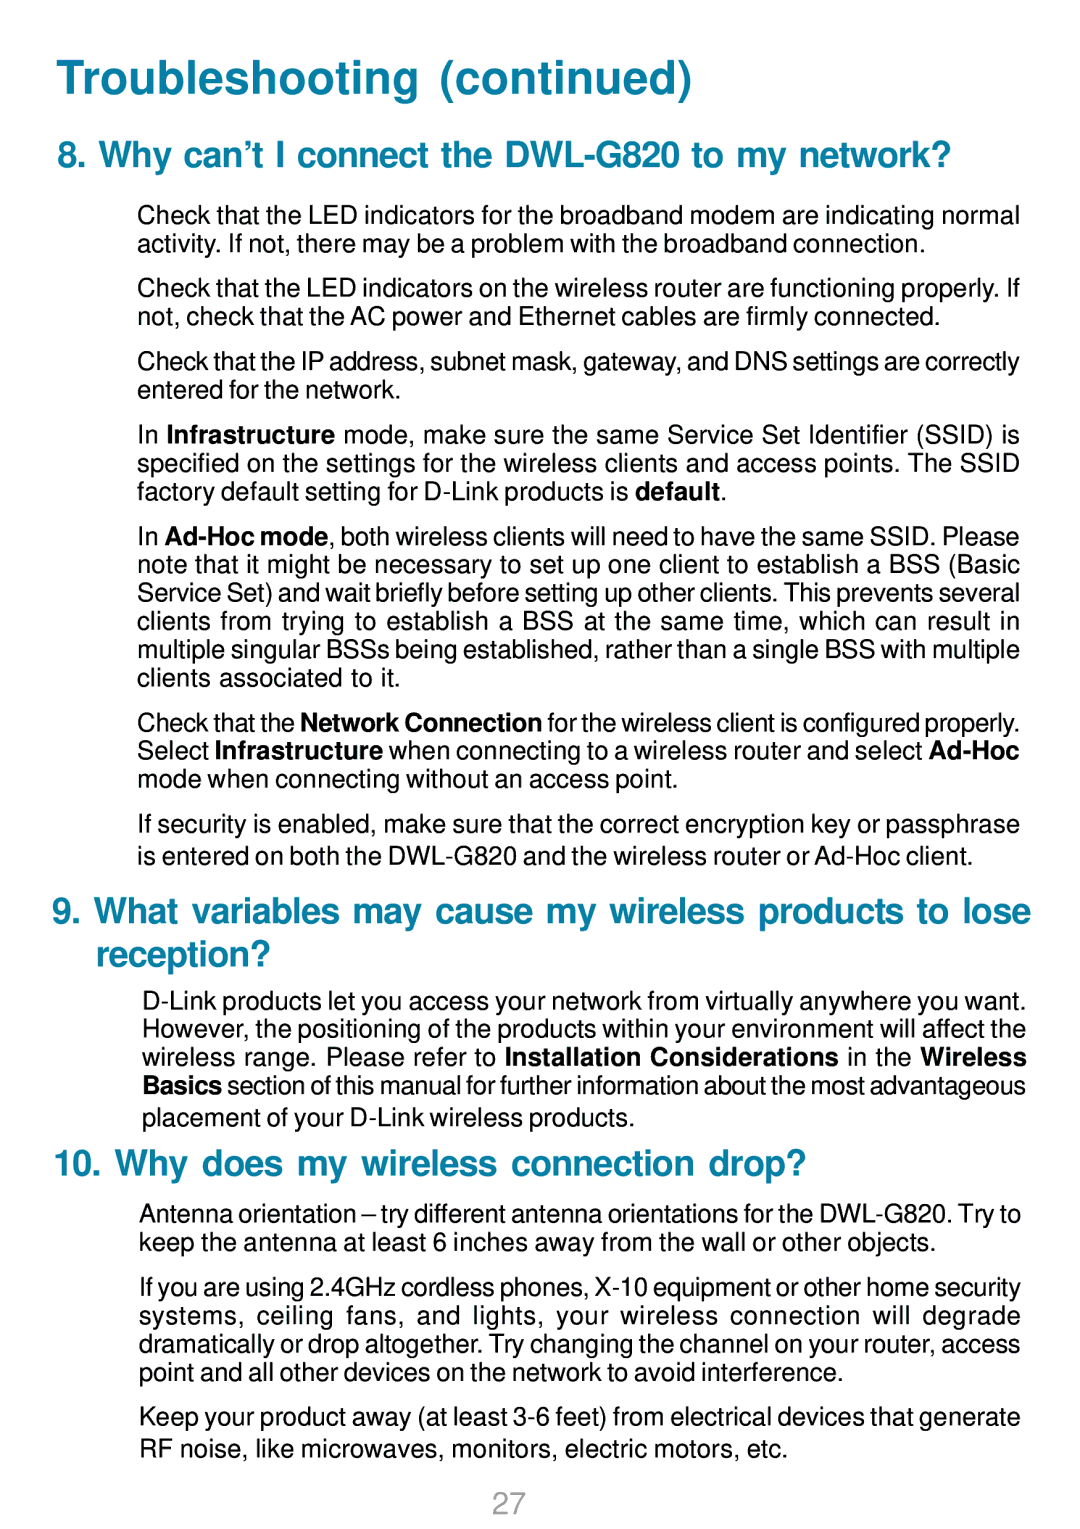 D-Link manual Why can’t I connect the DWL-G820 to my network?, Why does my wireless connection drop? 